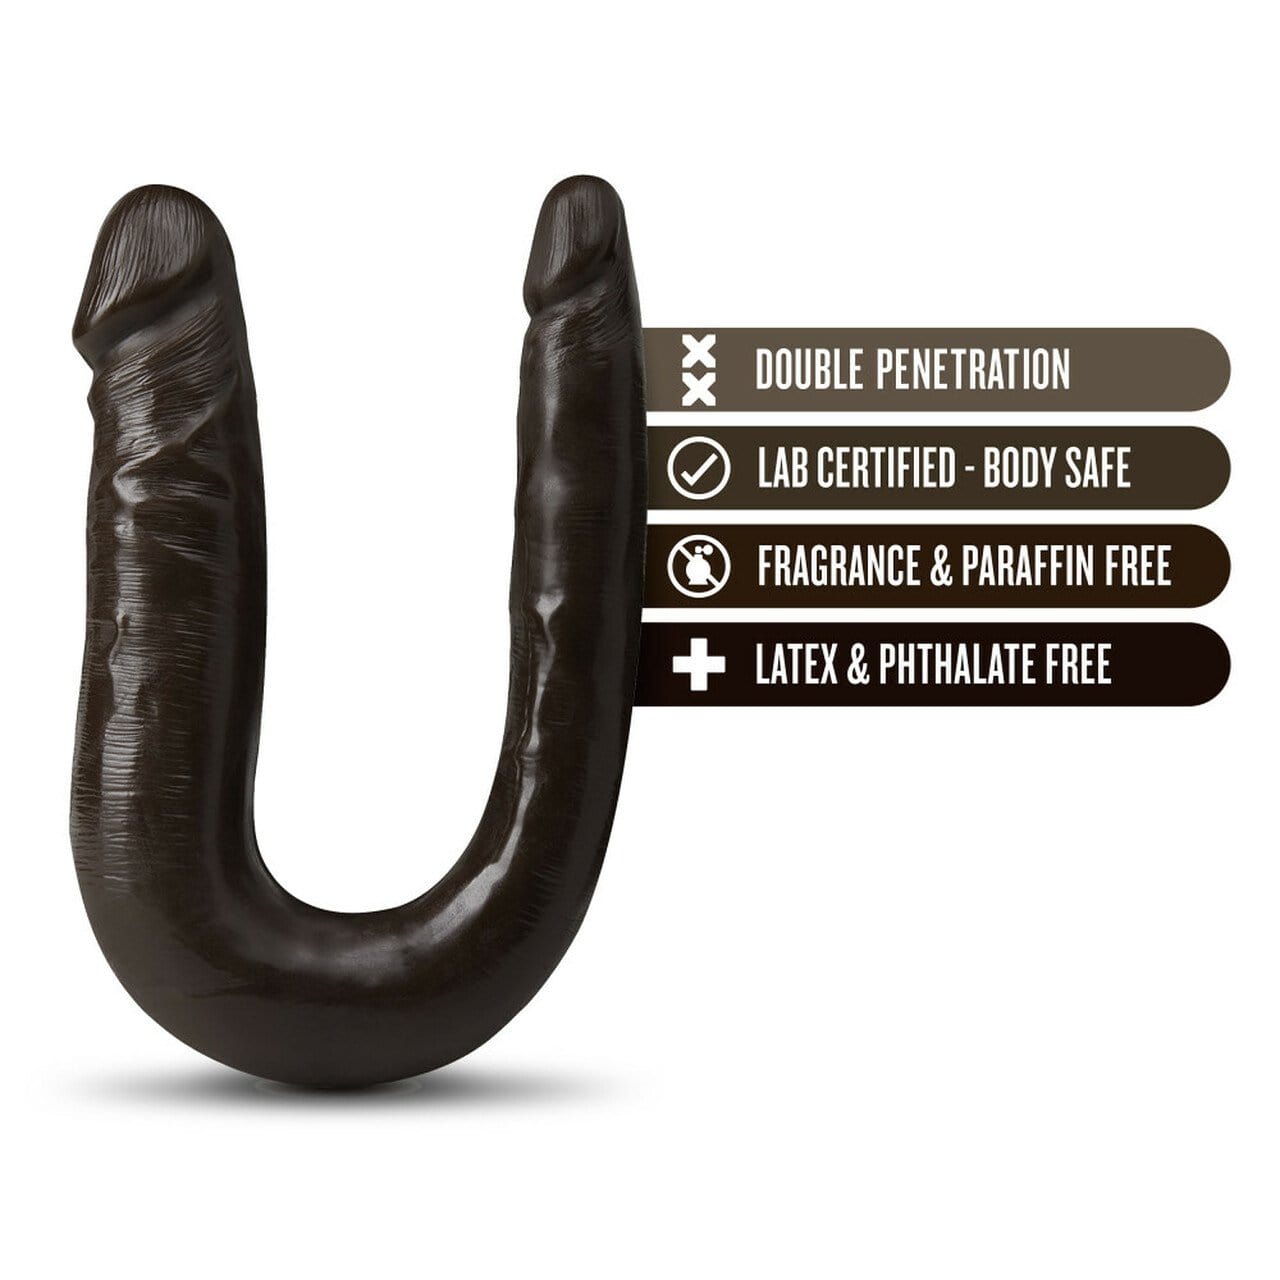 Dr. Skin Mini Double Dong - Chocolate - Thorn & Feather Sex Toy Canada